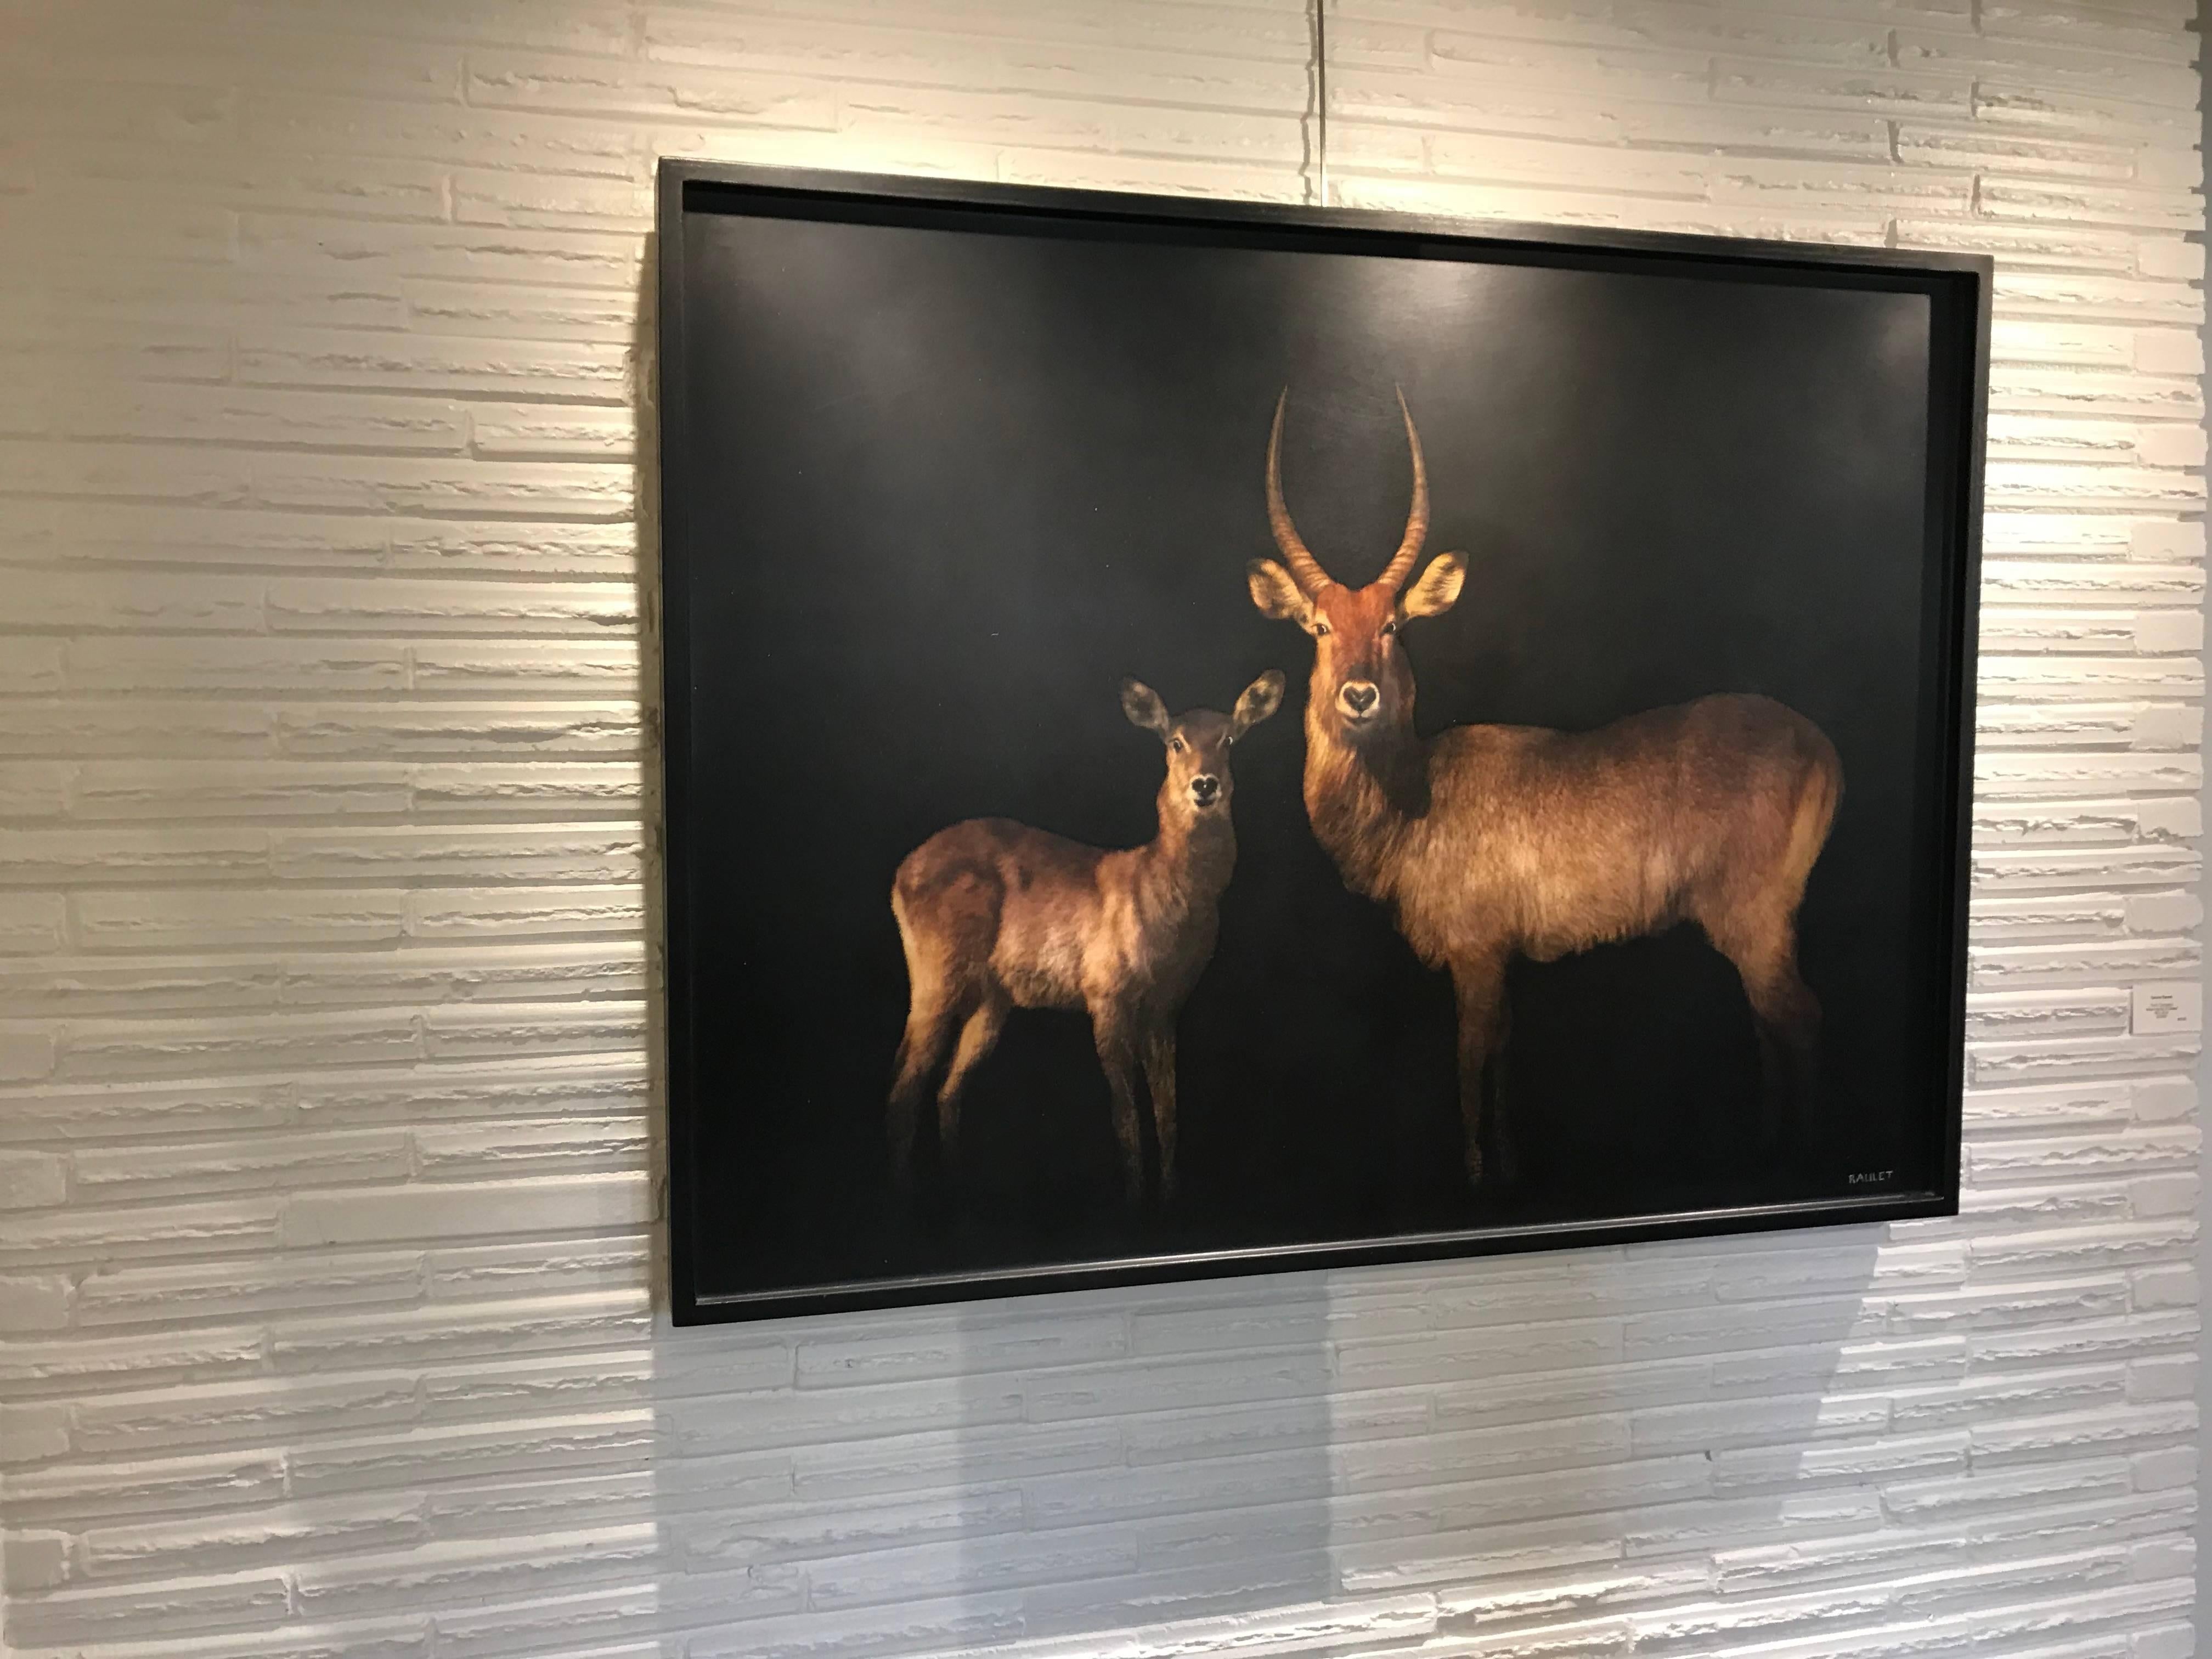 This piece by American artist Dawne Raulet depicts two waterbucks in the sub-Saharan part of Africa.  The artist starts with a photograph, superimposes it onto a custom-made board and begins layering mediums (oil paint and resin mainly) on top of